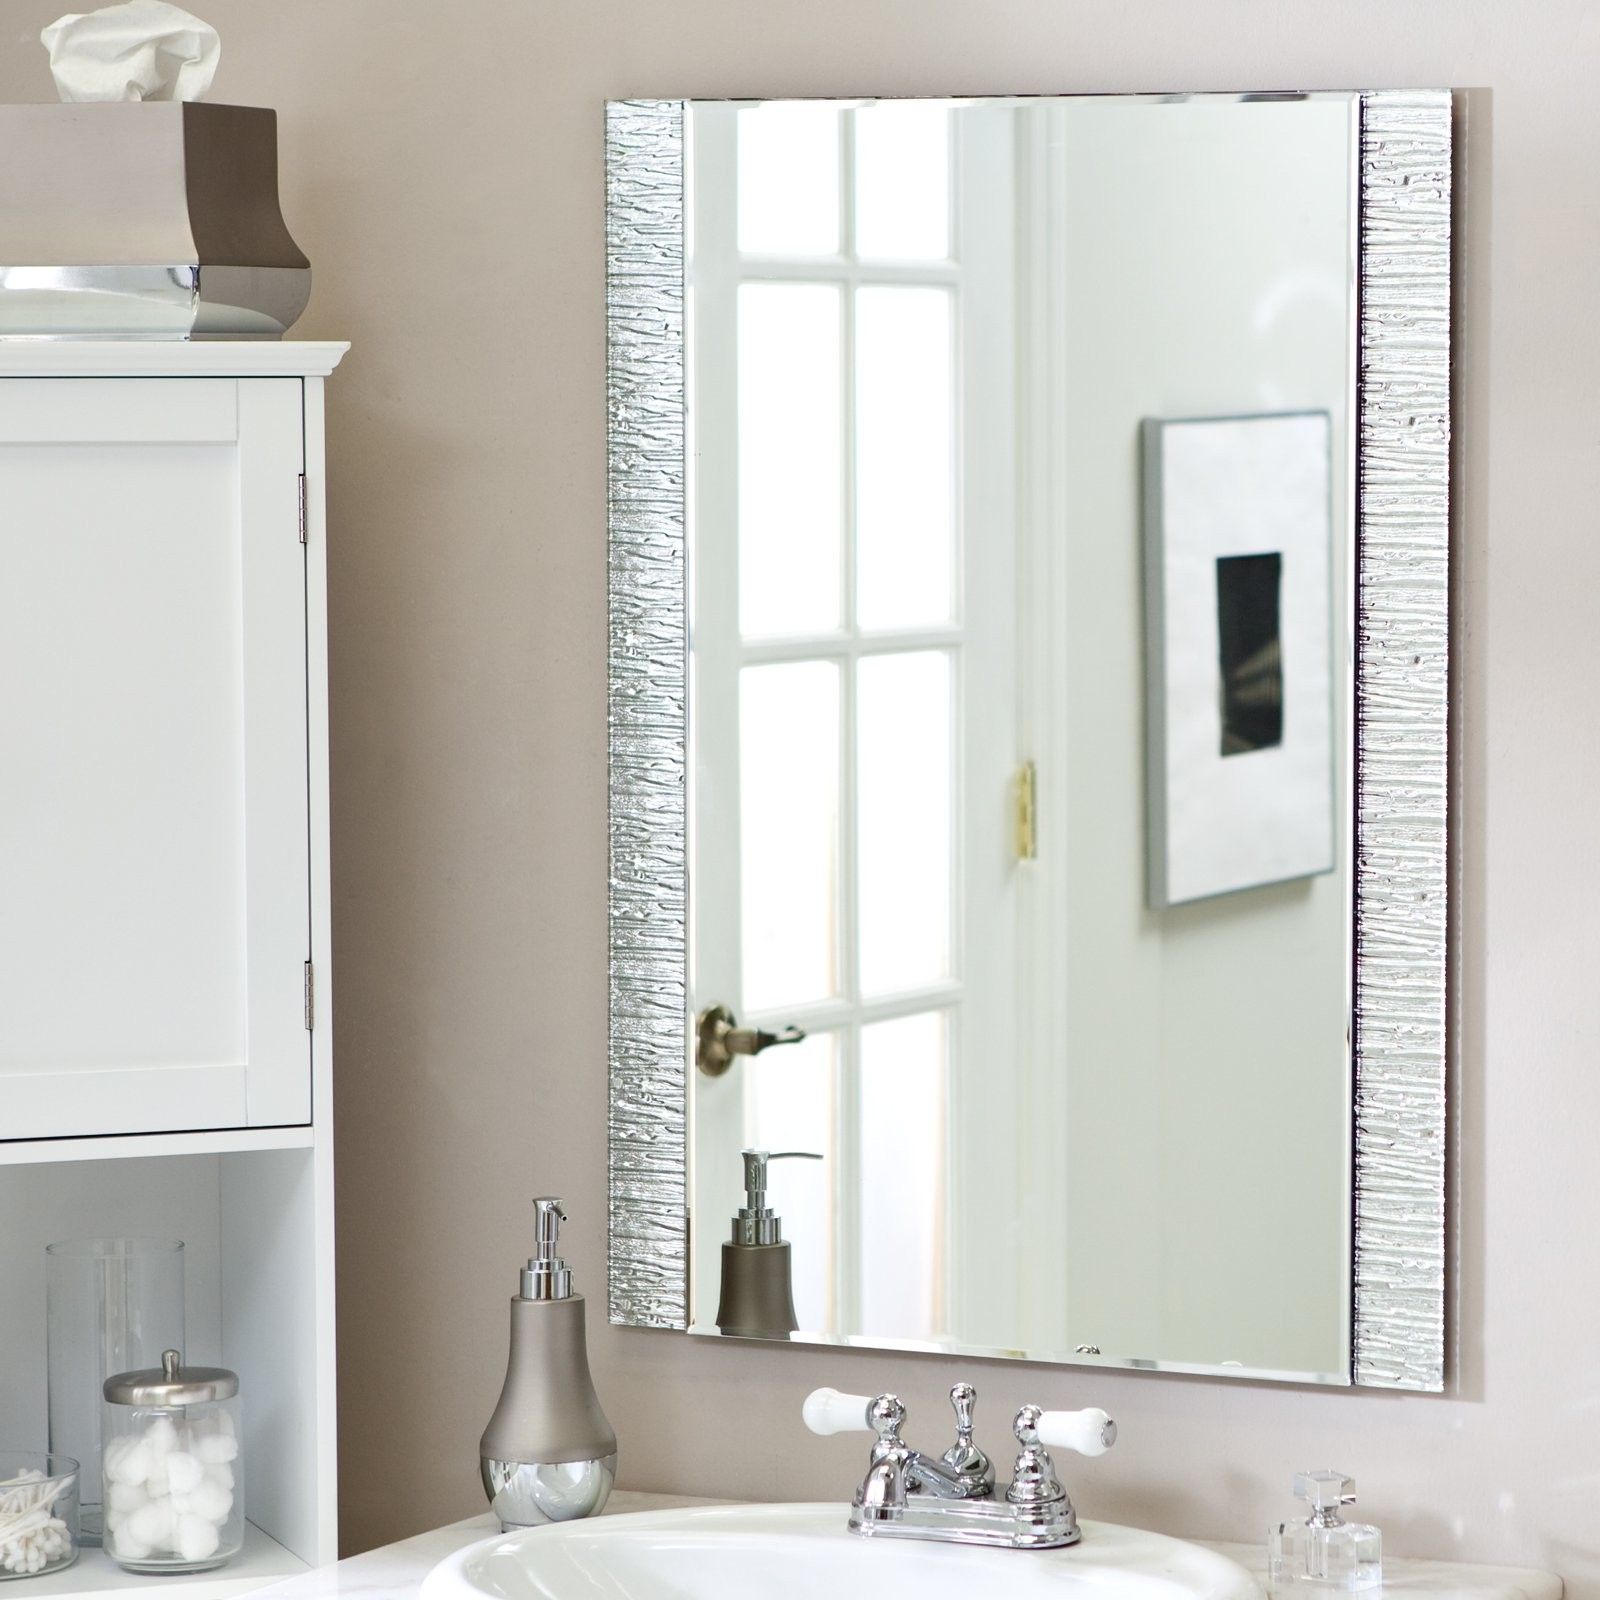 Awesome Bathroom Frameless Mirror Concept – Home Sweet Home | Modern Intended For Frameless Cut Corner Vanity Mirrors (View 14 of 15)